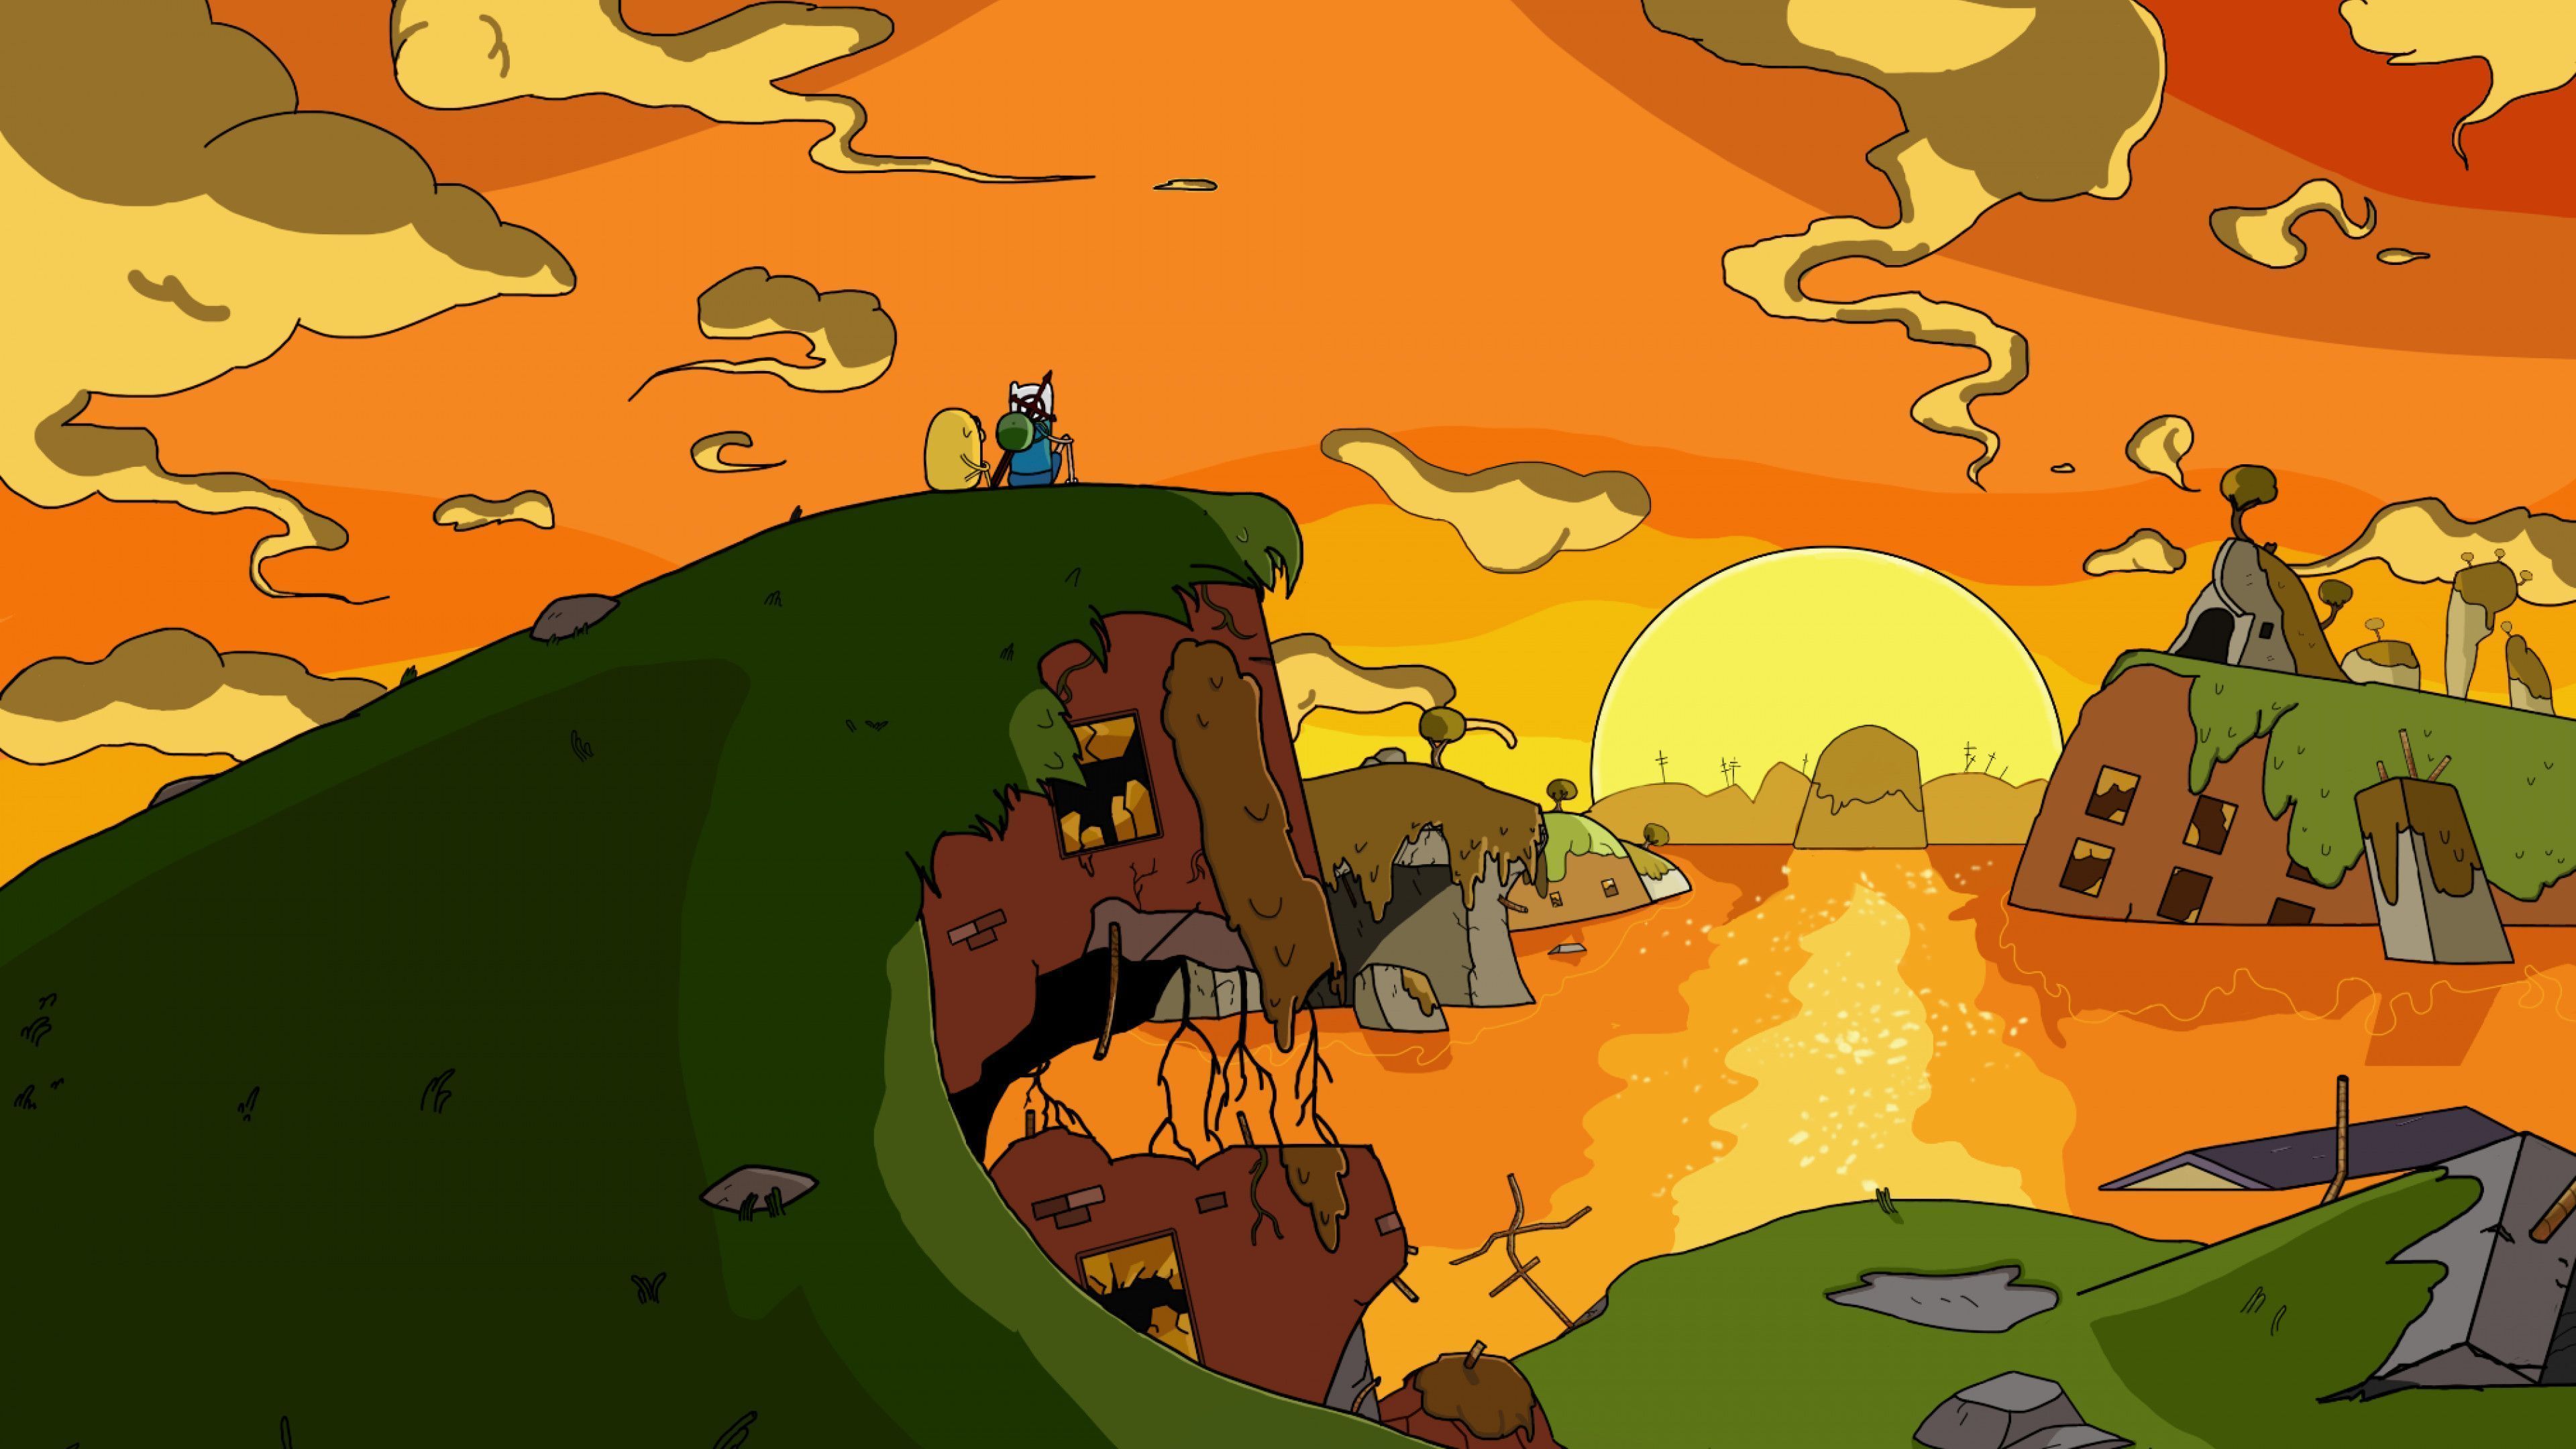 Finn and Jake look out over a colorful landscape - Adventure Time